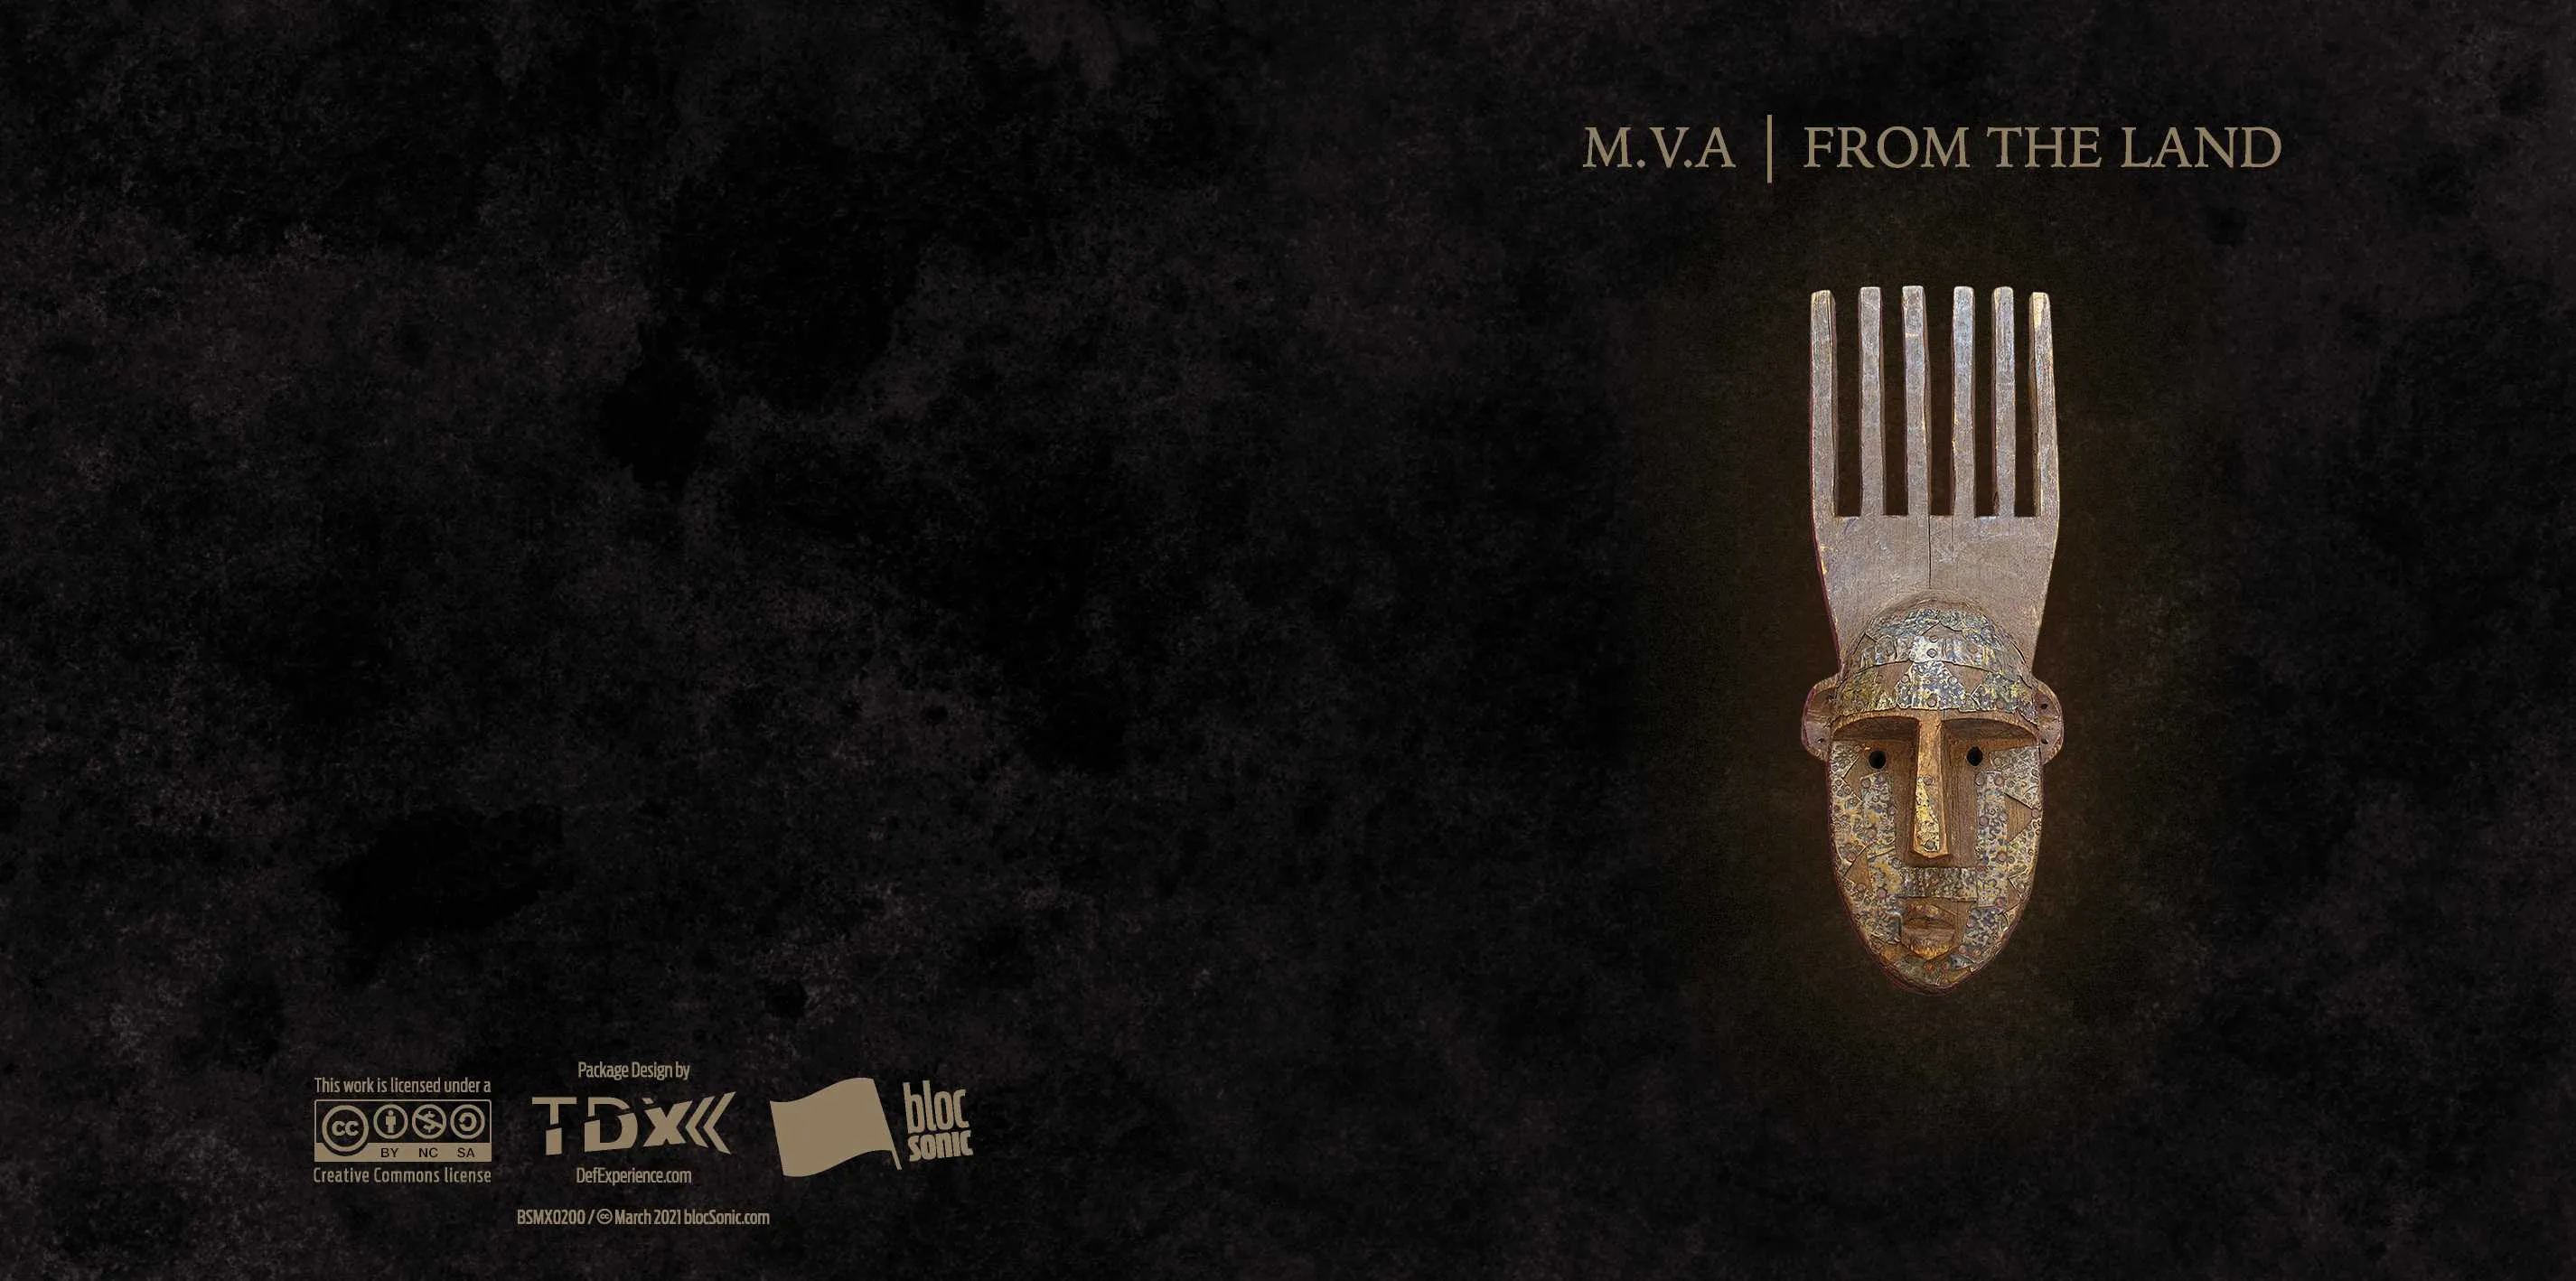 Album insert for “From The Land” by M.V.A